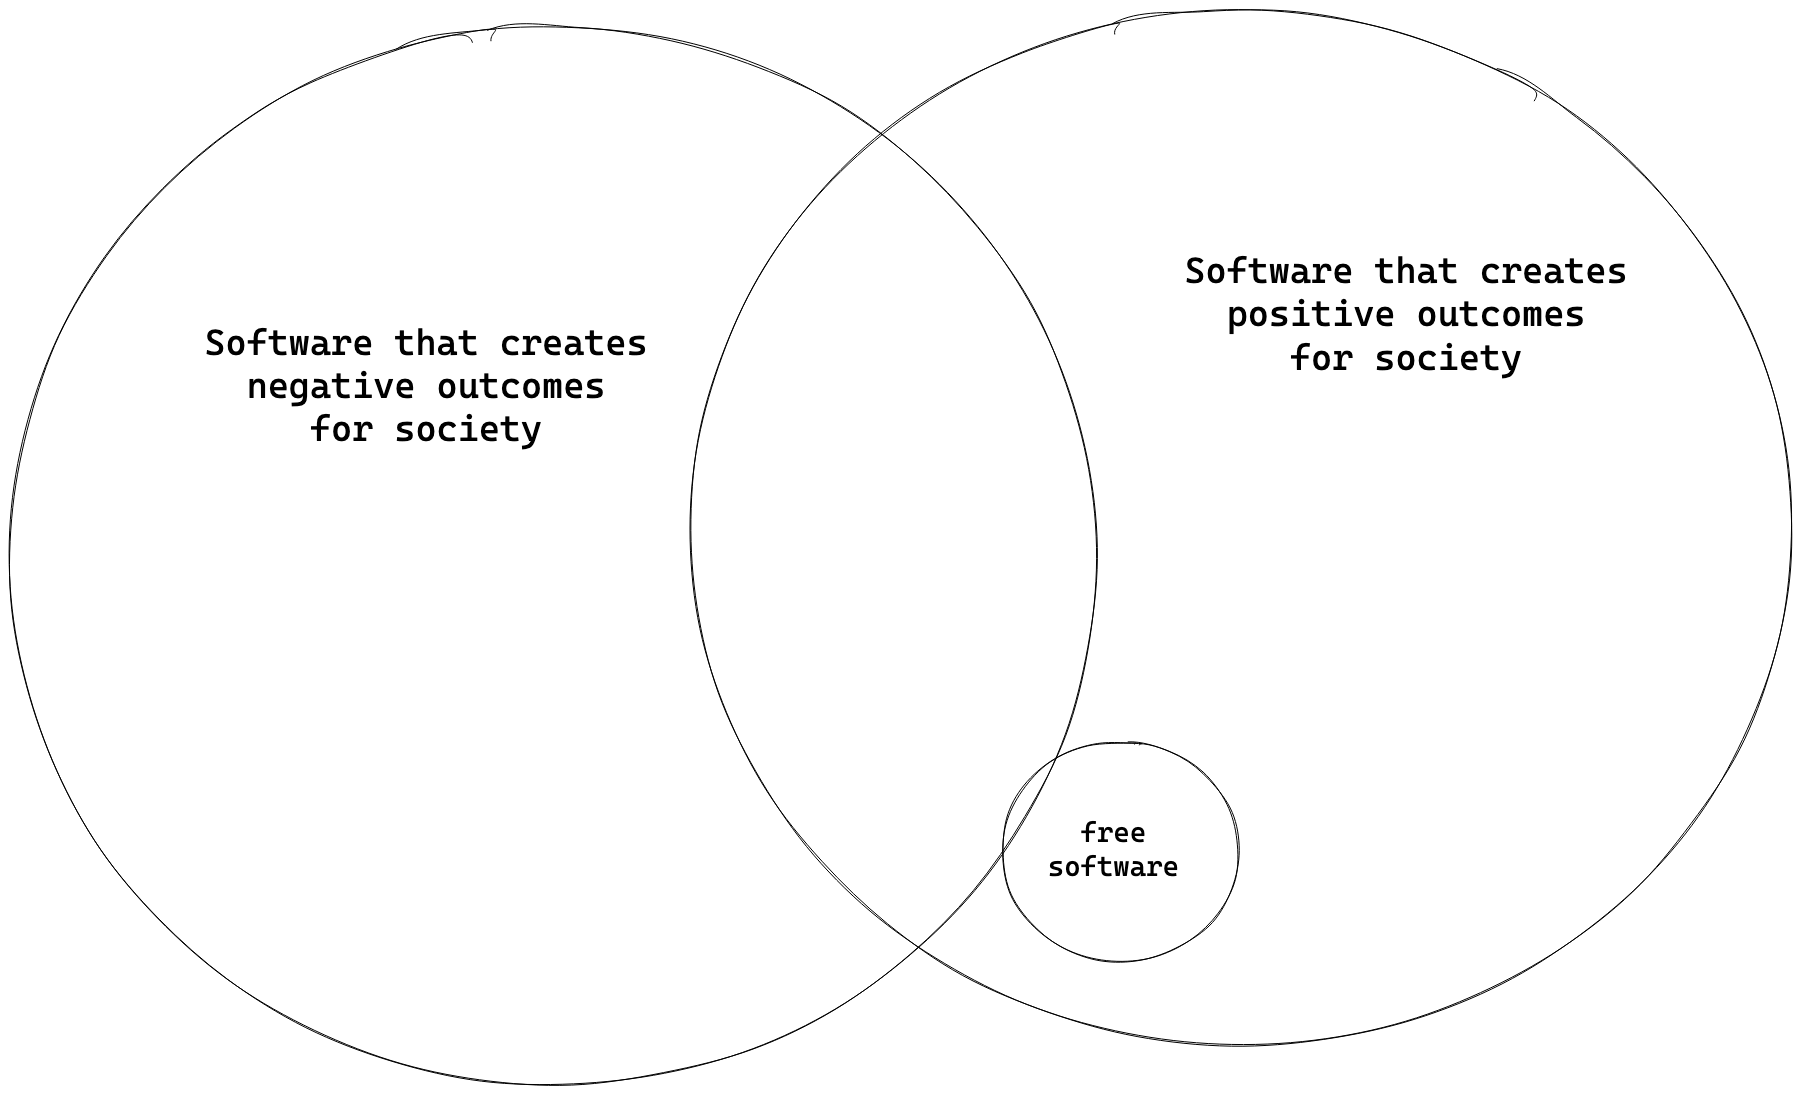 Venn diagram: software that creates negative outcomes overlaps with software that creates positive outcomes. A smaller circle called "free software" is inside the circle with positive outcomes, only slightly overlapping the negative outcomes